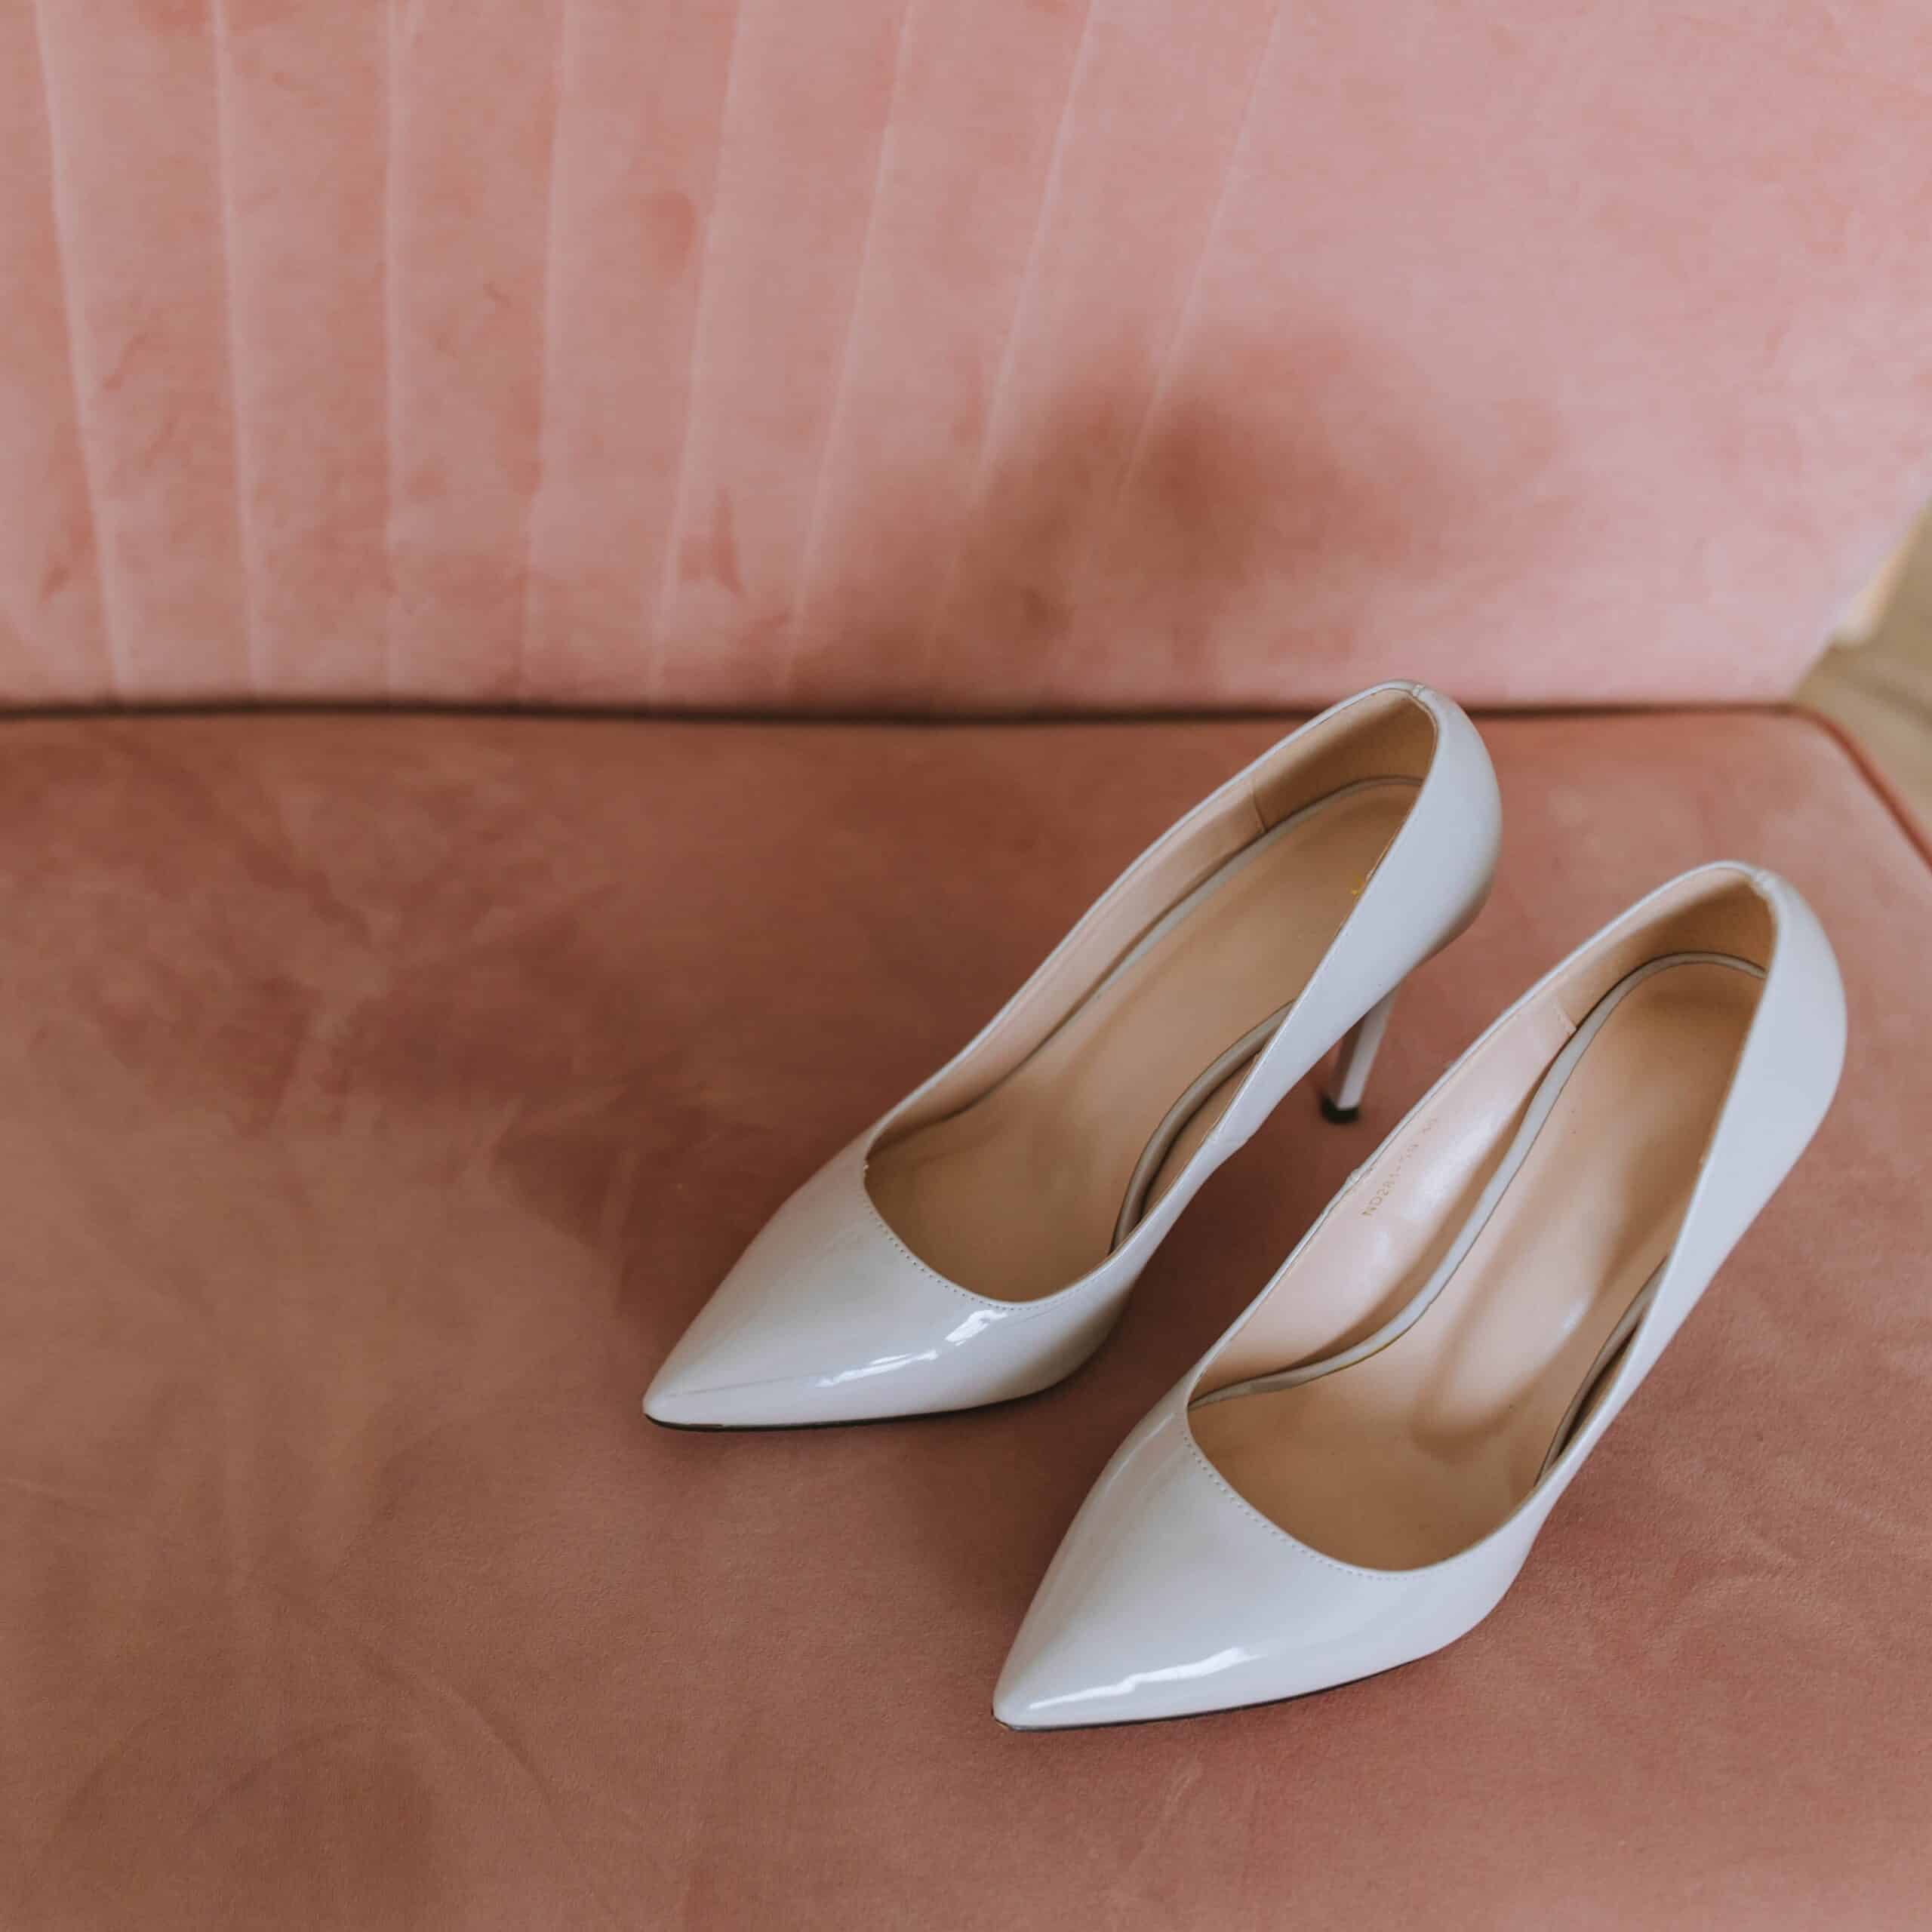 Can You Wear White Shoes To A Wedding? What’s The Deal?